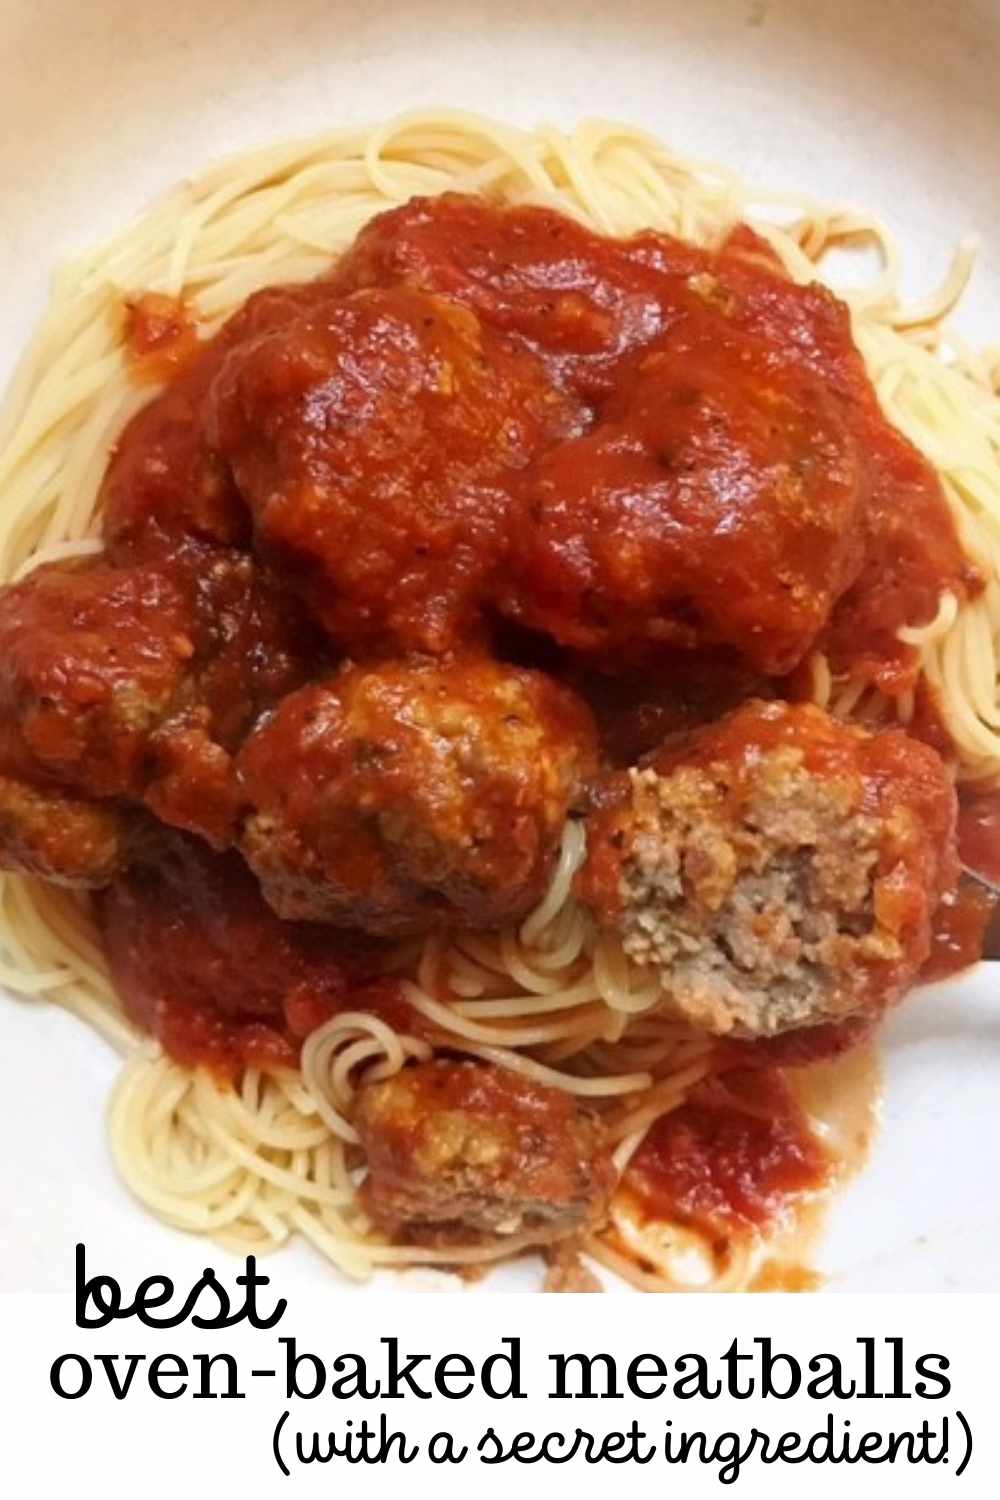 The Best Oven-Baked Meatballs Recipe (With a Secret Ingredient!)